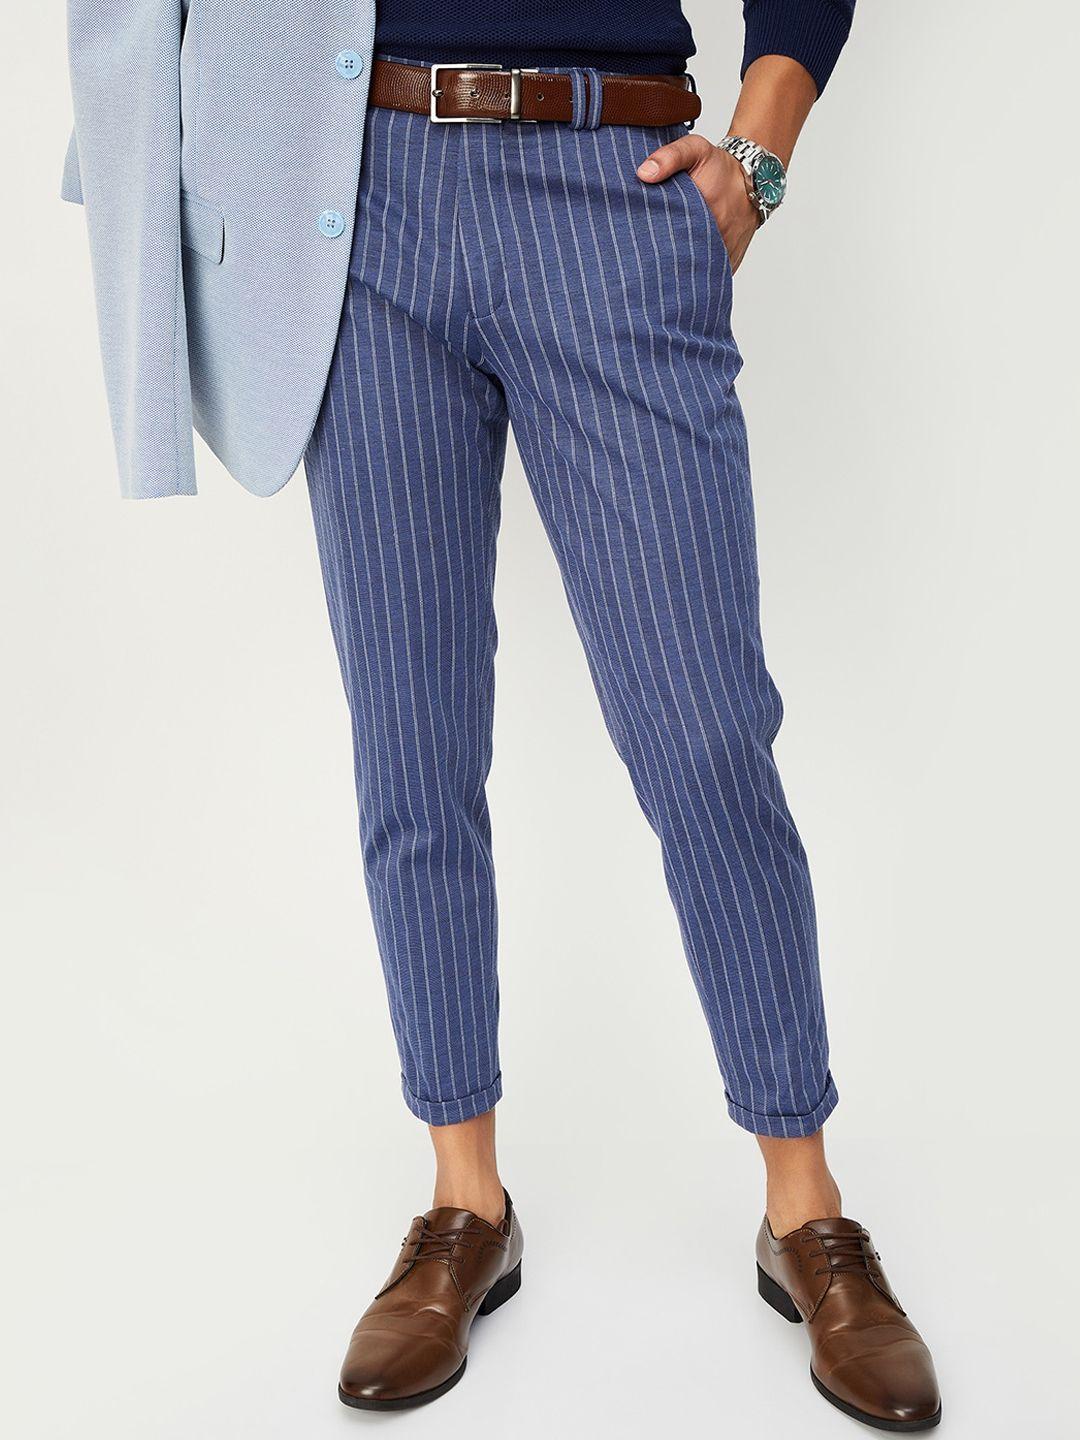 max-men-striped-mid-rise-cropped-formal-trousers